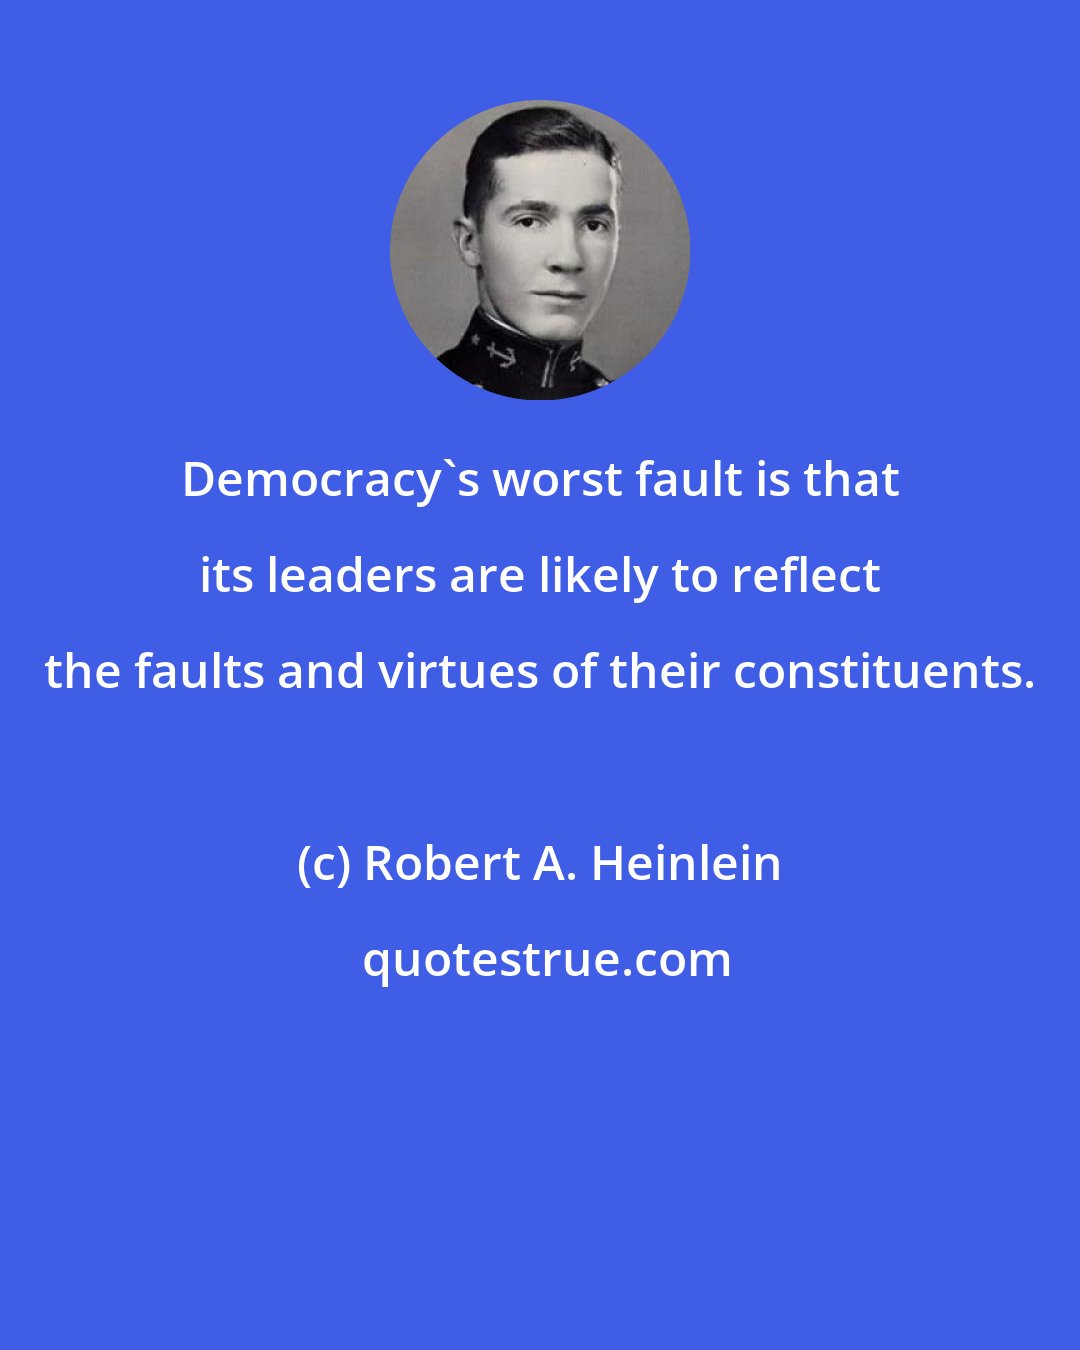 Robert A. Heinlein: Democracy's worst fault is that its leaders are likely to reflect the faults and virtues of their constituents.